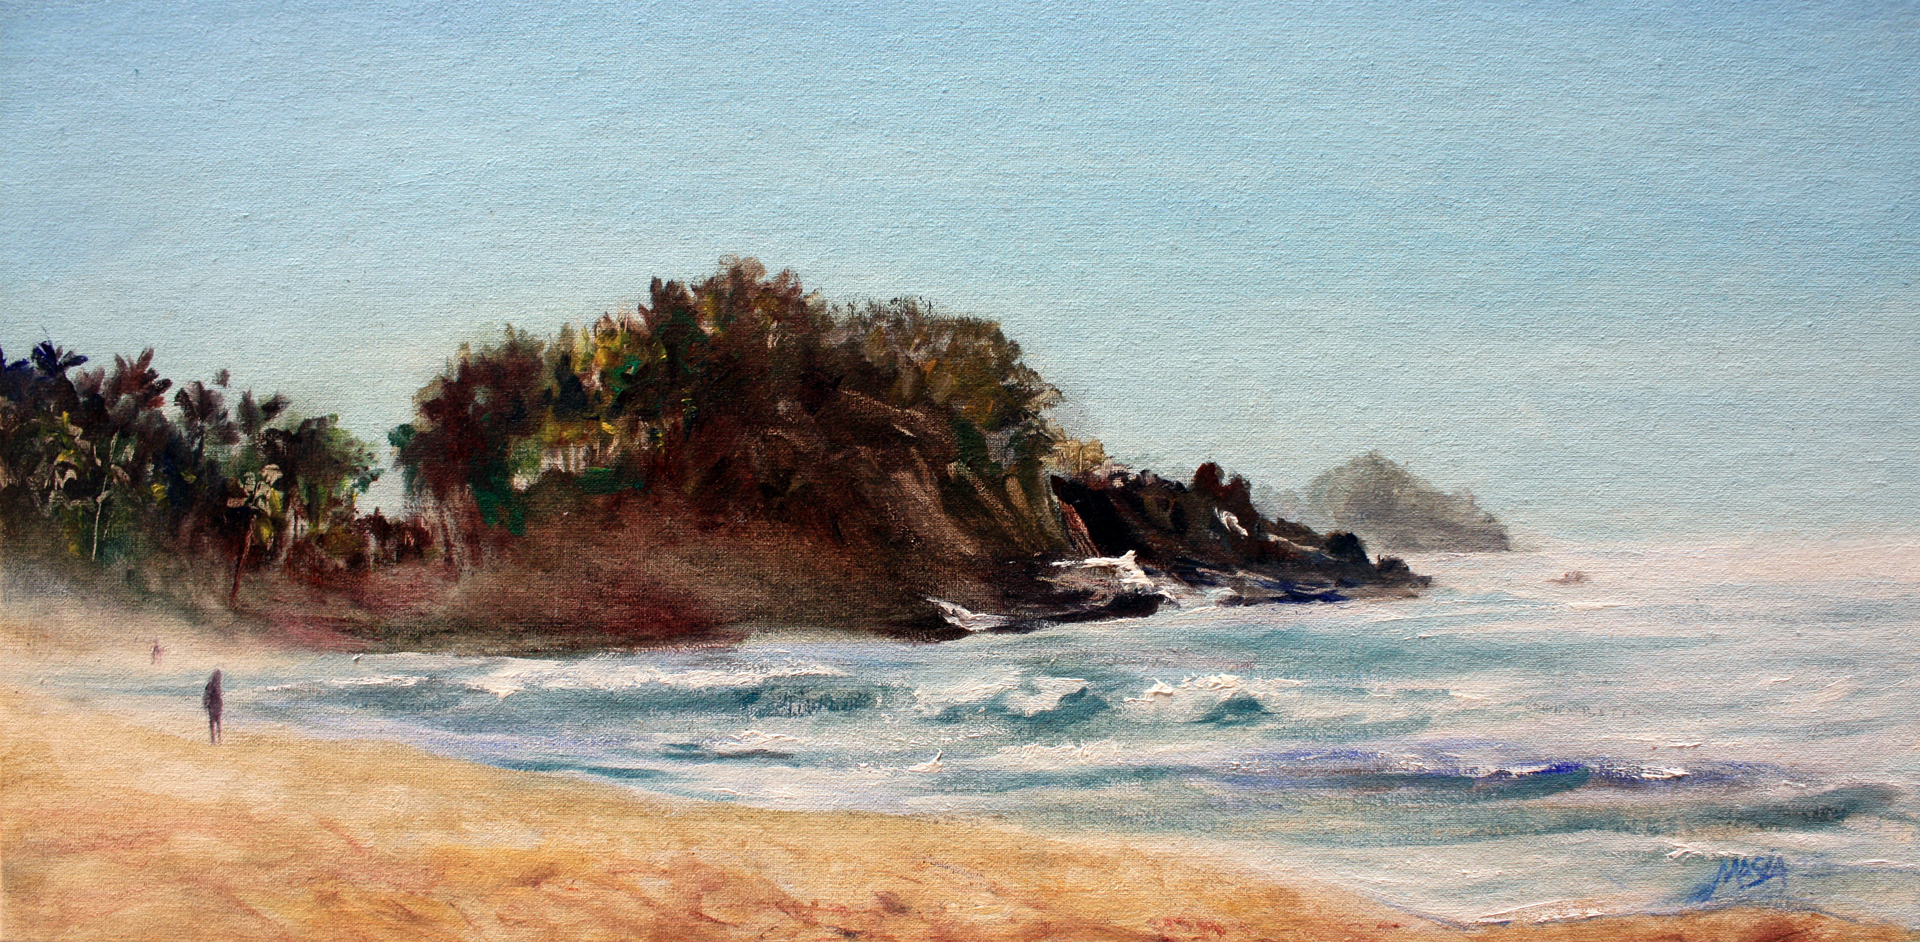 Blinded By the Light,(Plein Air in San Pancho)1920p72dpi copy